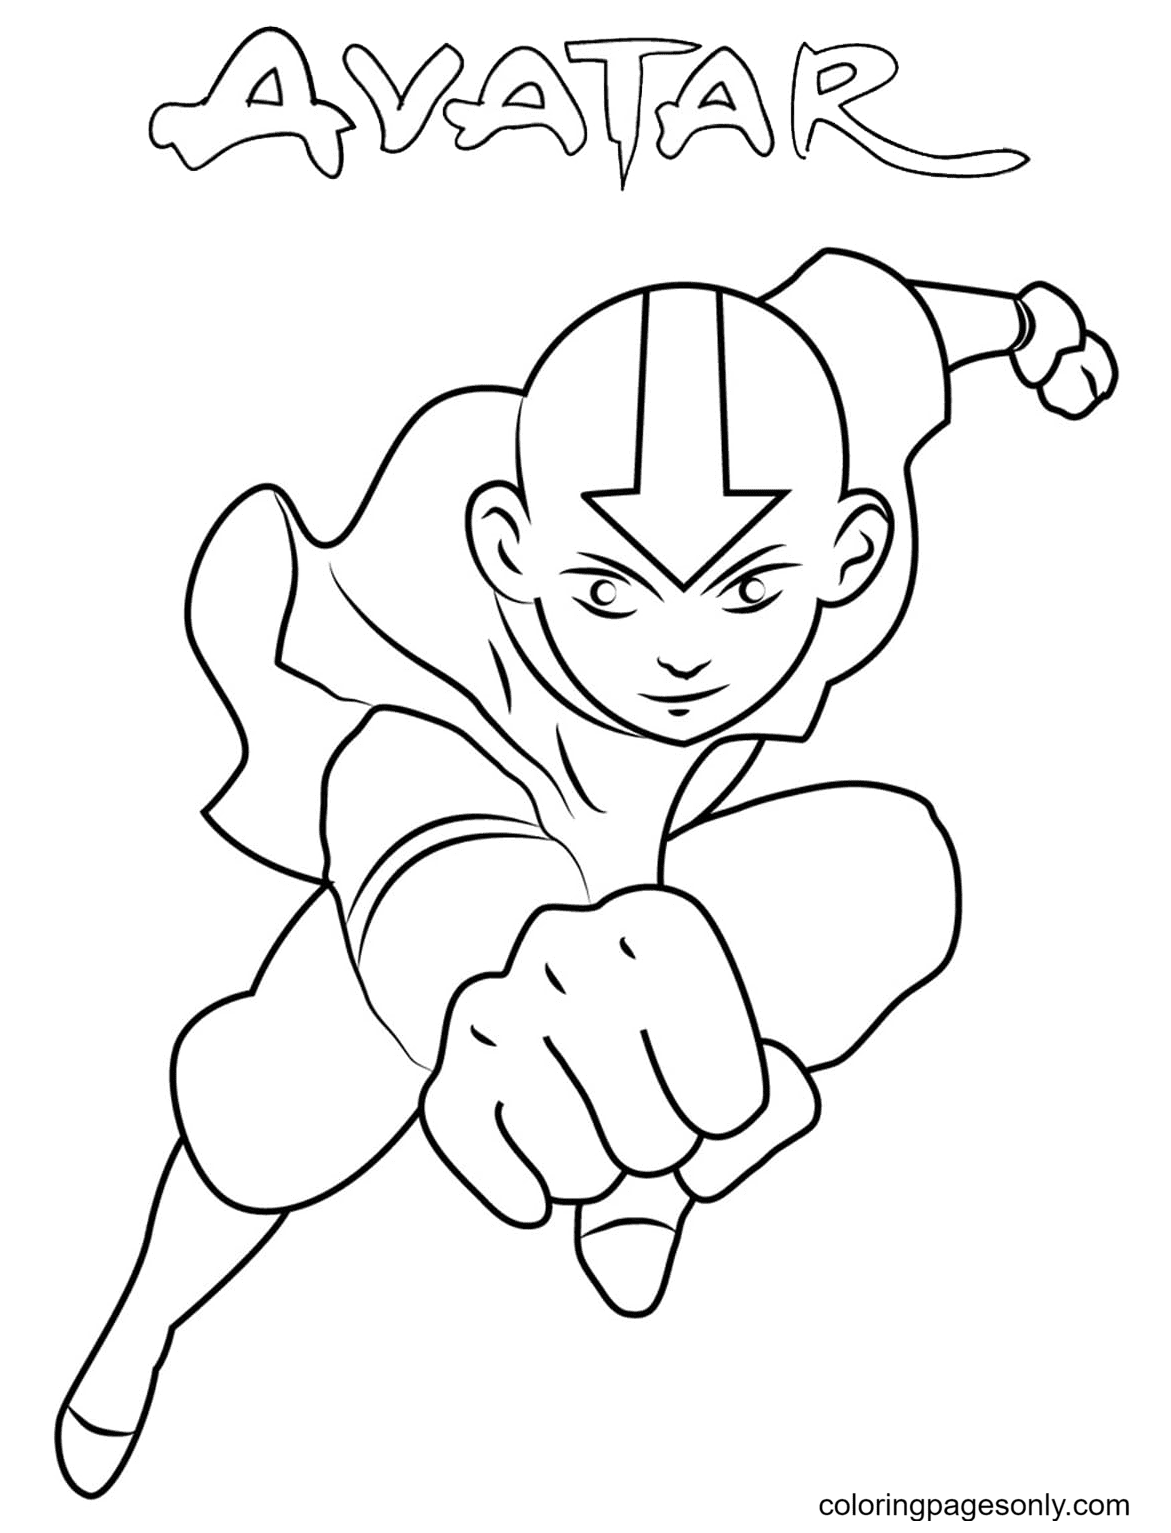 Avatar Aang Coloring Pages